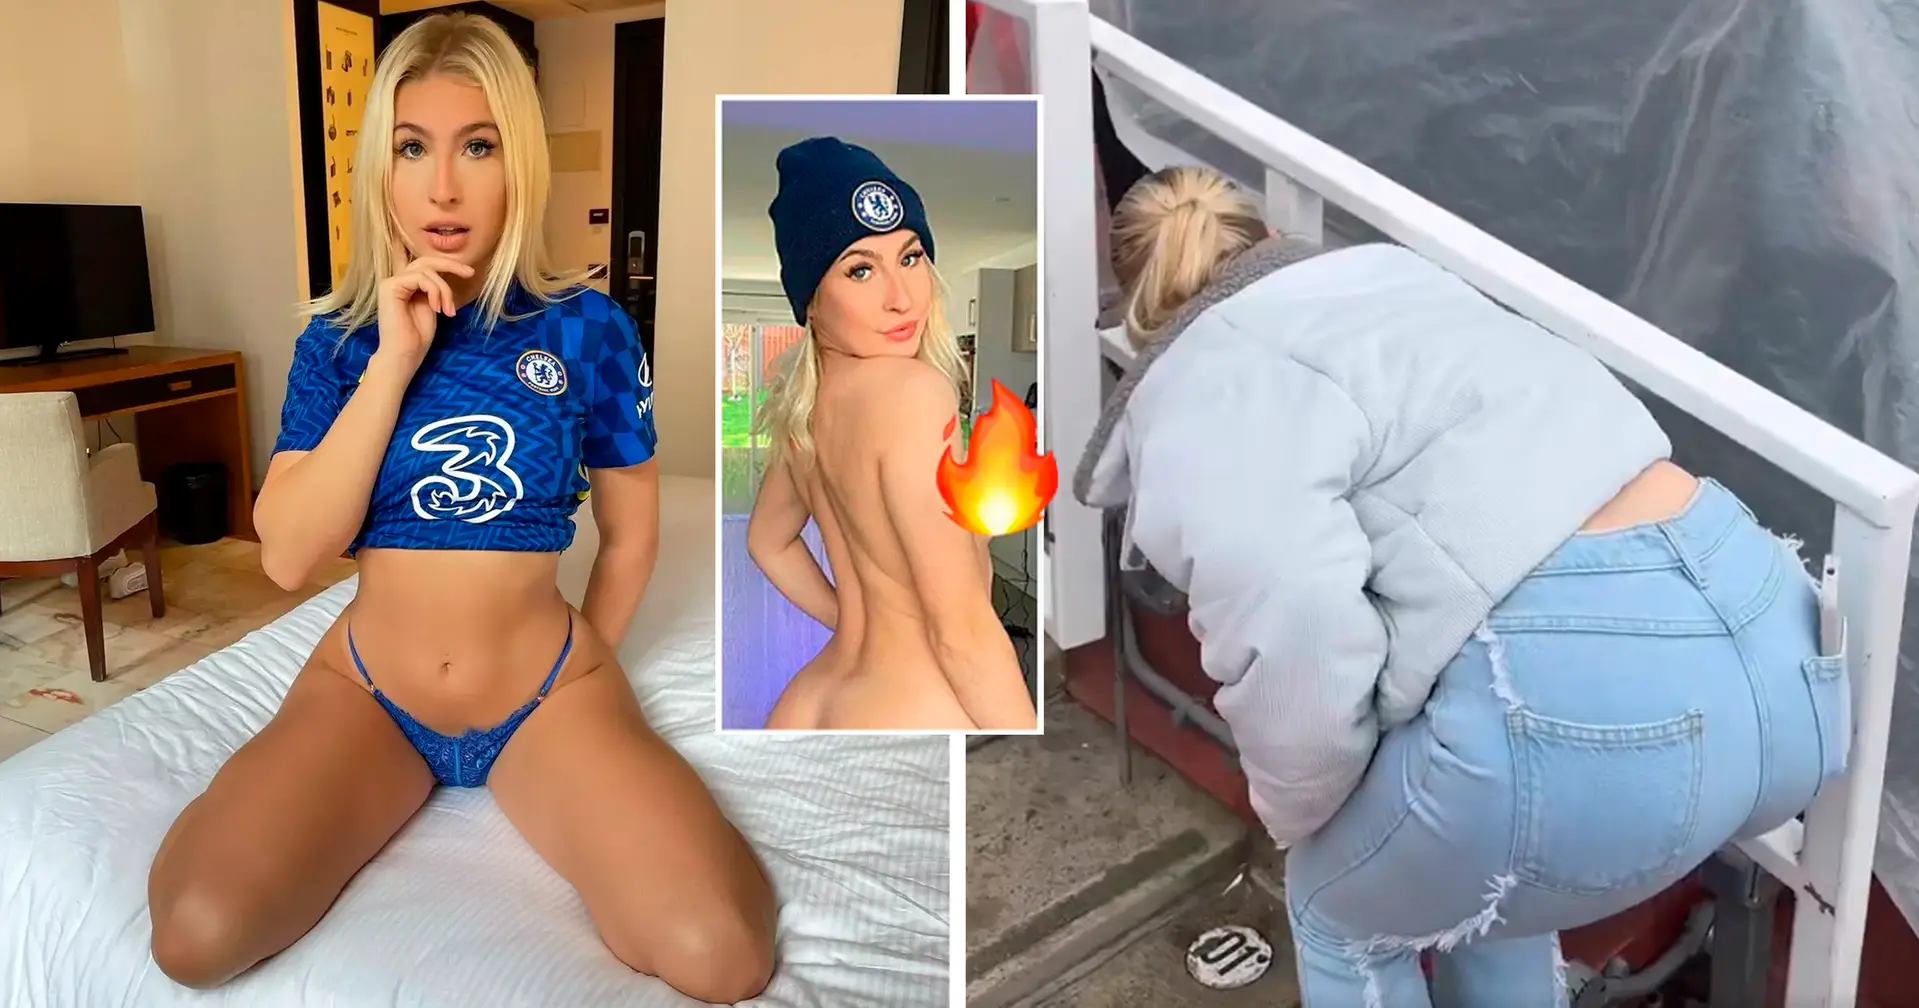 Squirt champion Astrid Wett leaves a nasty surprise for Arteta - it didn't help Chelsea avoid a thrashing in the derby